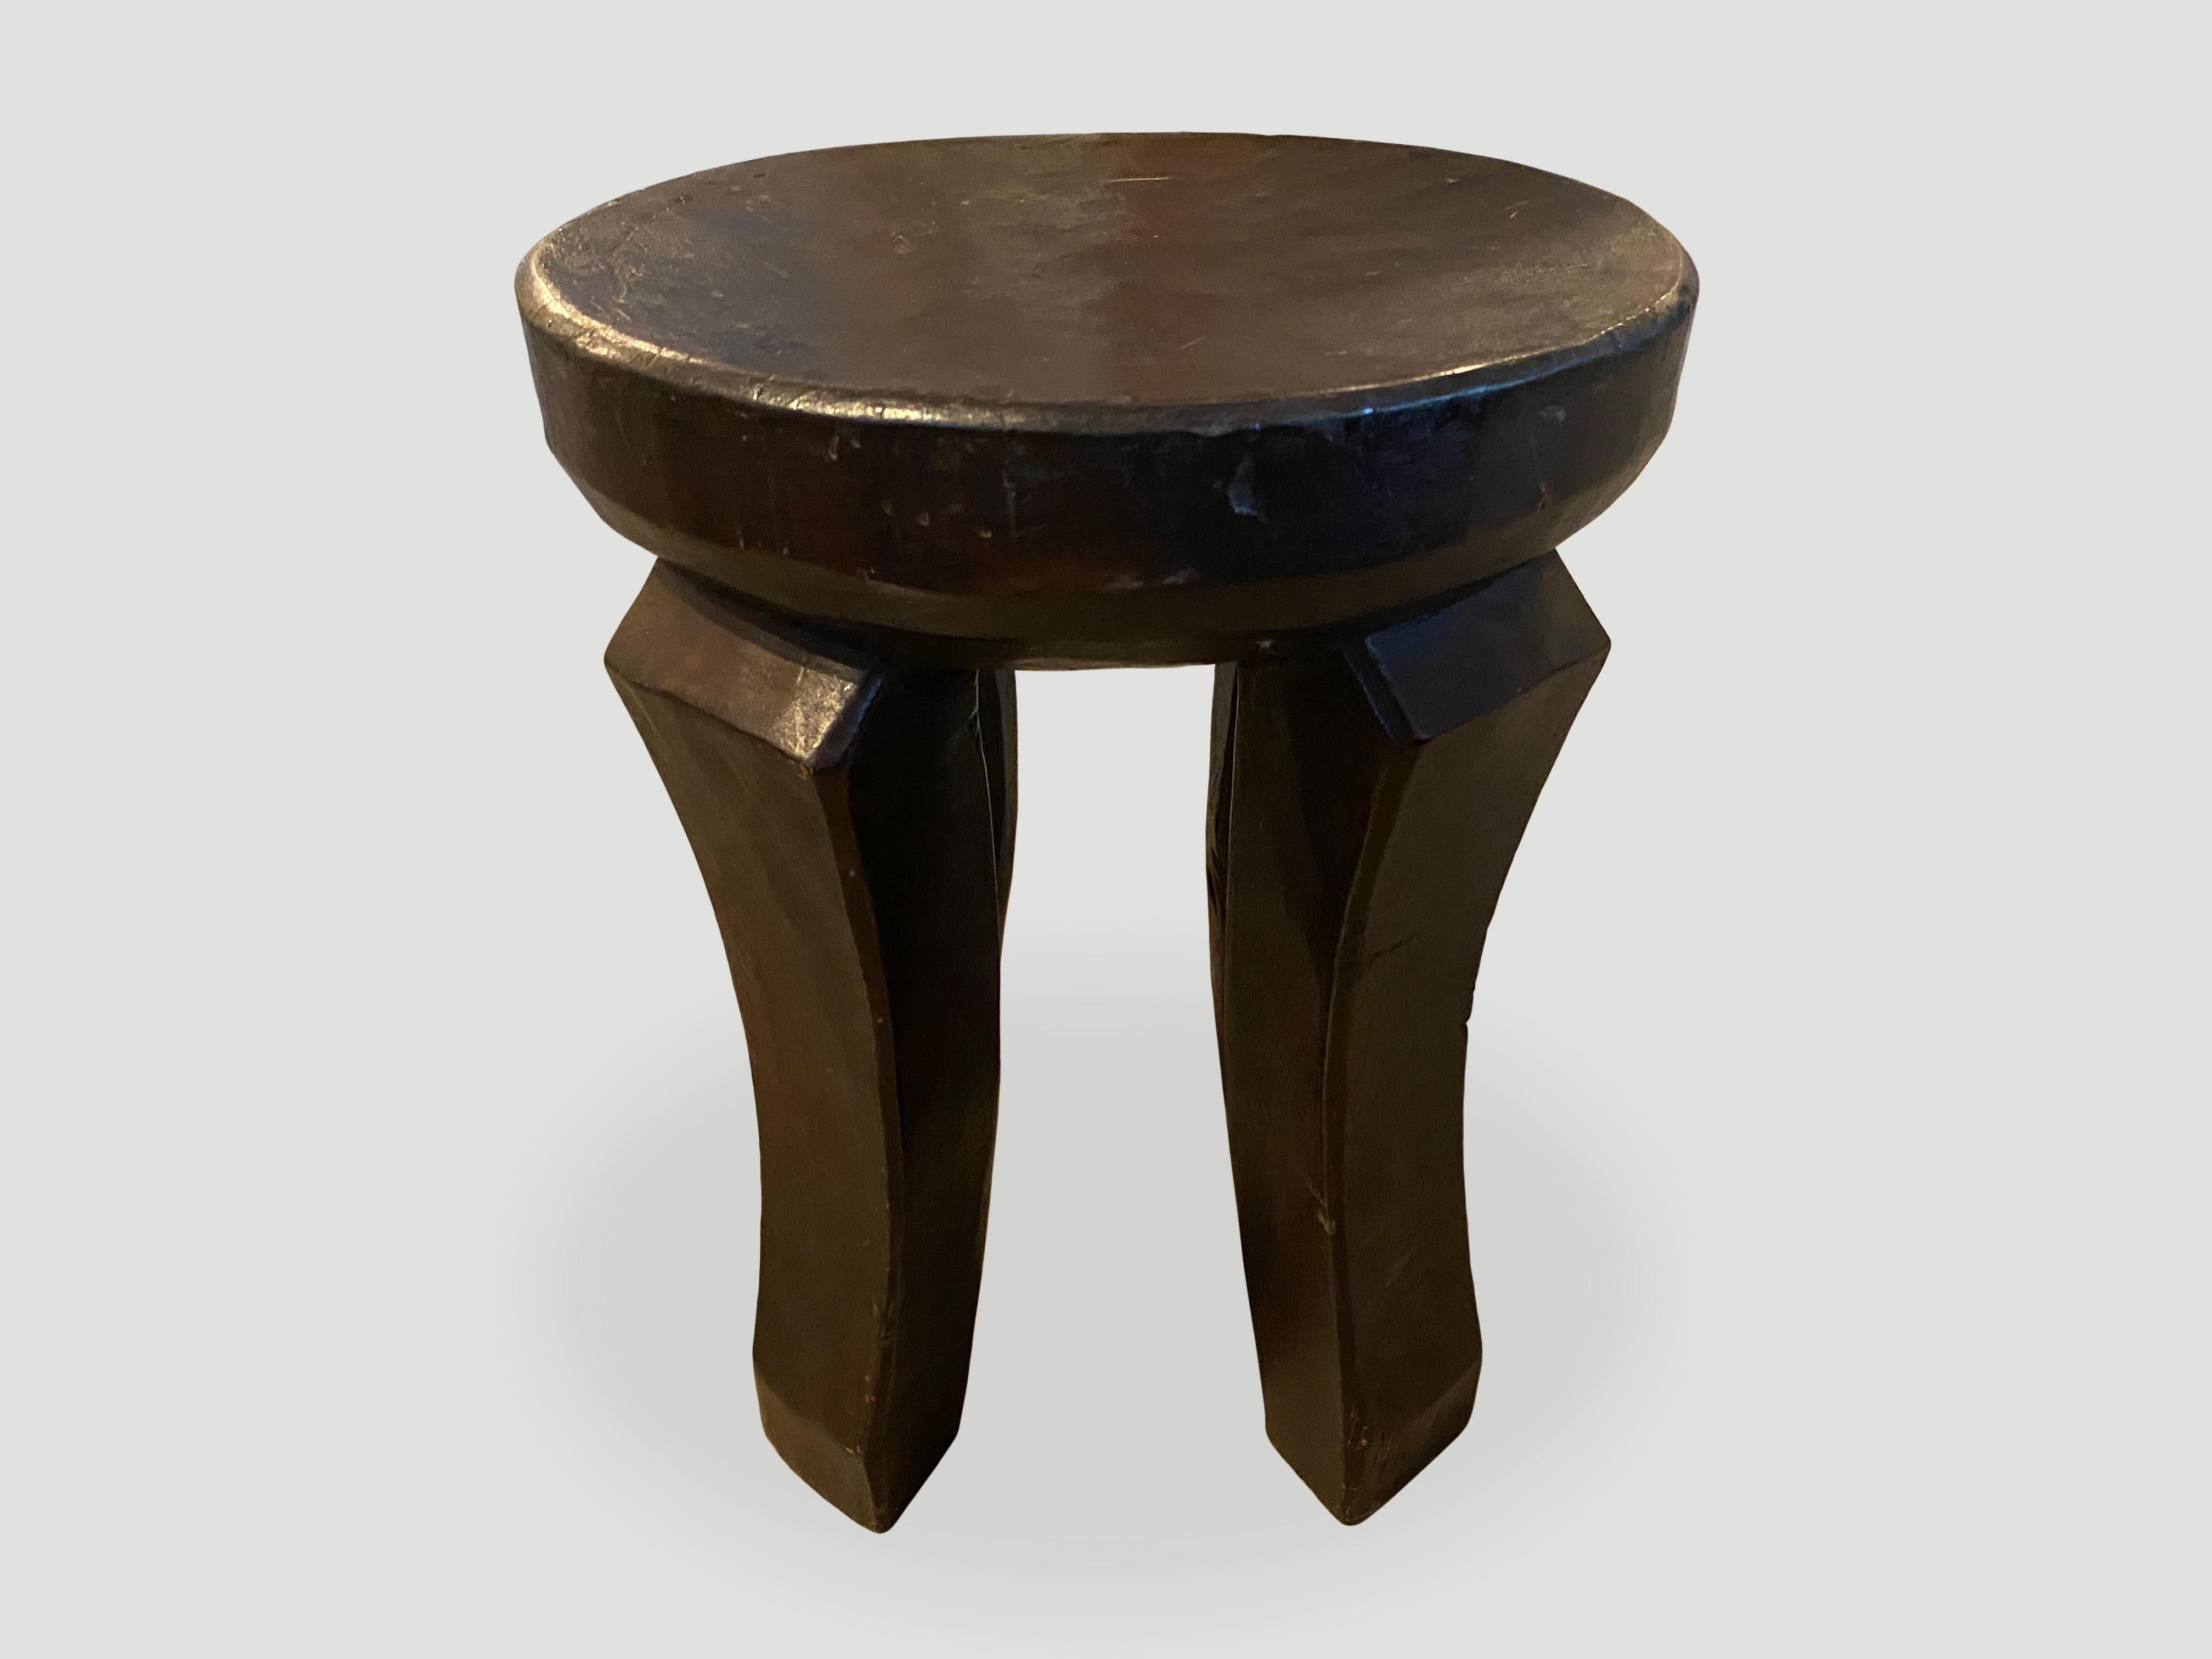 Hand-Carved Andrianna Shamaris African Mahogany Wood Side Table or Stool